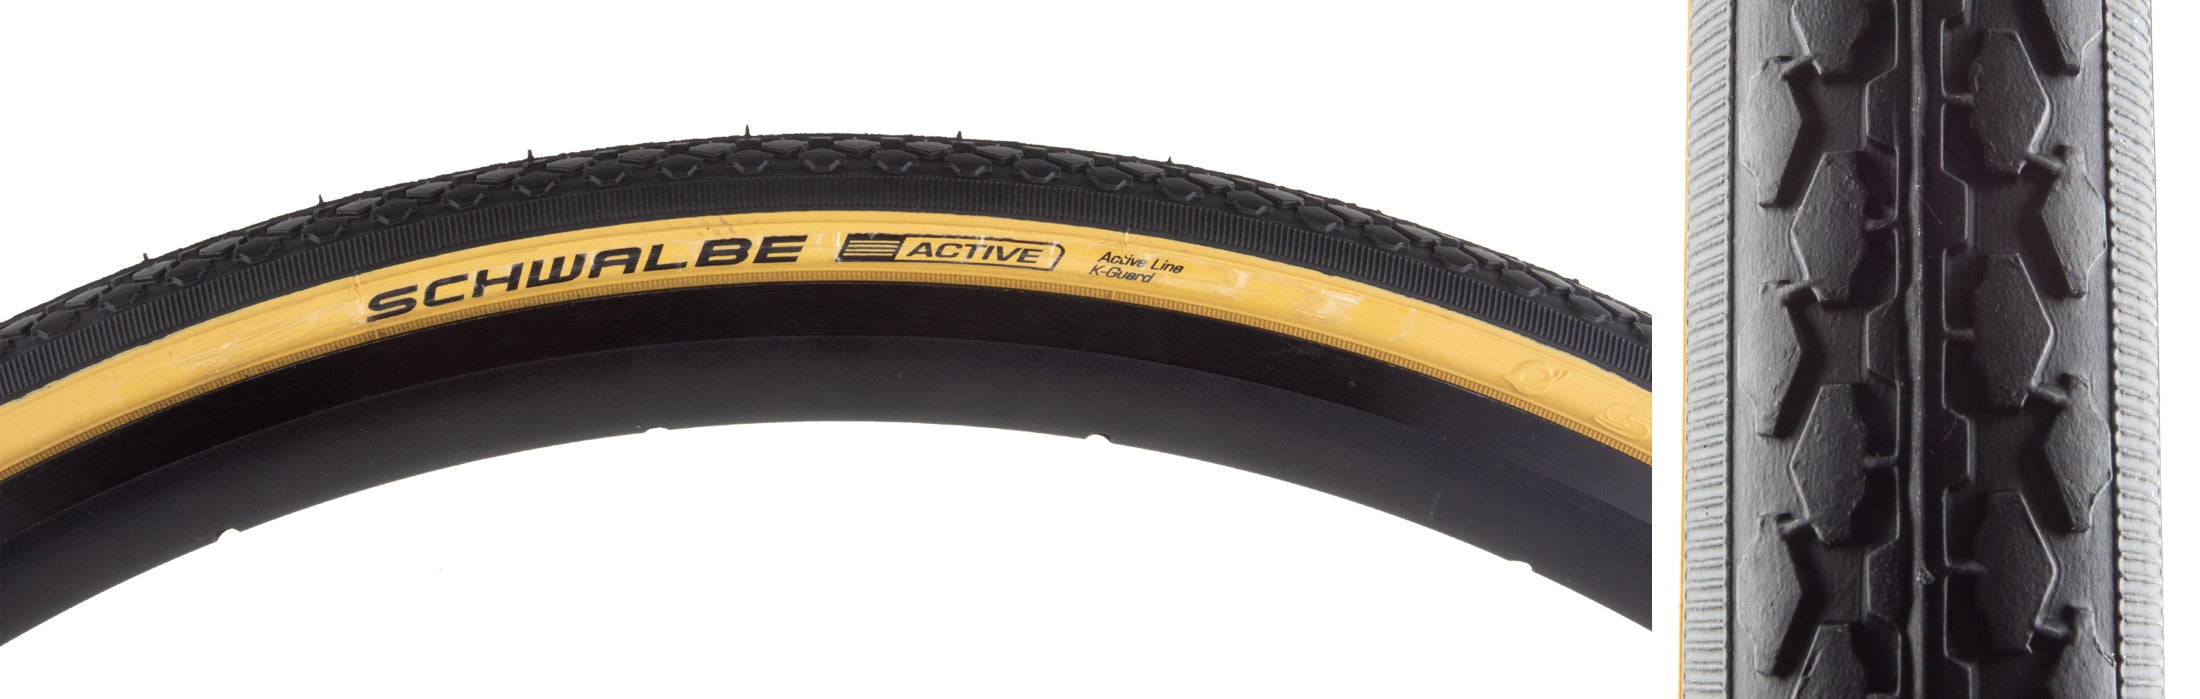 Schwalbe Classic HS159 Active Twin, Gum Wall, Wire Bead Tire, 27 x 1-1/4